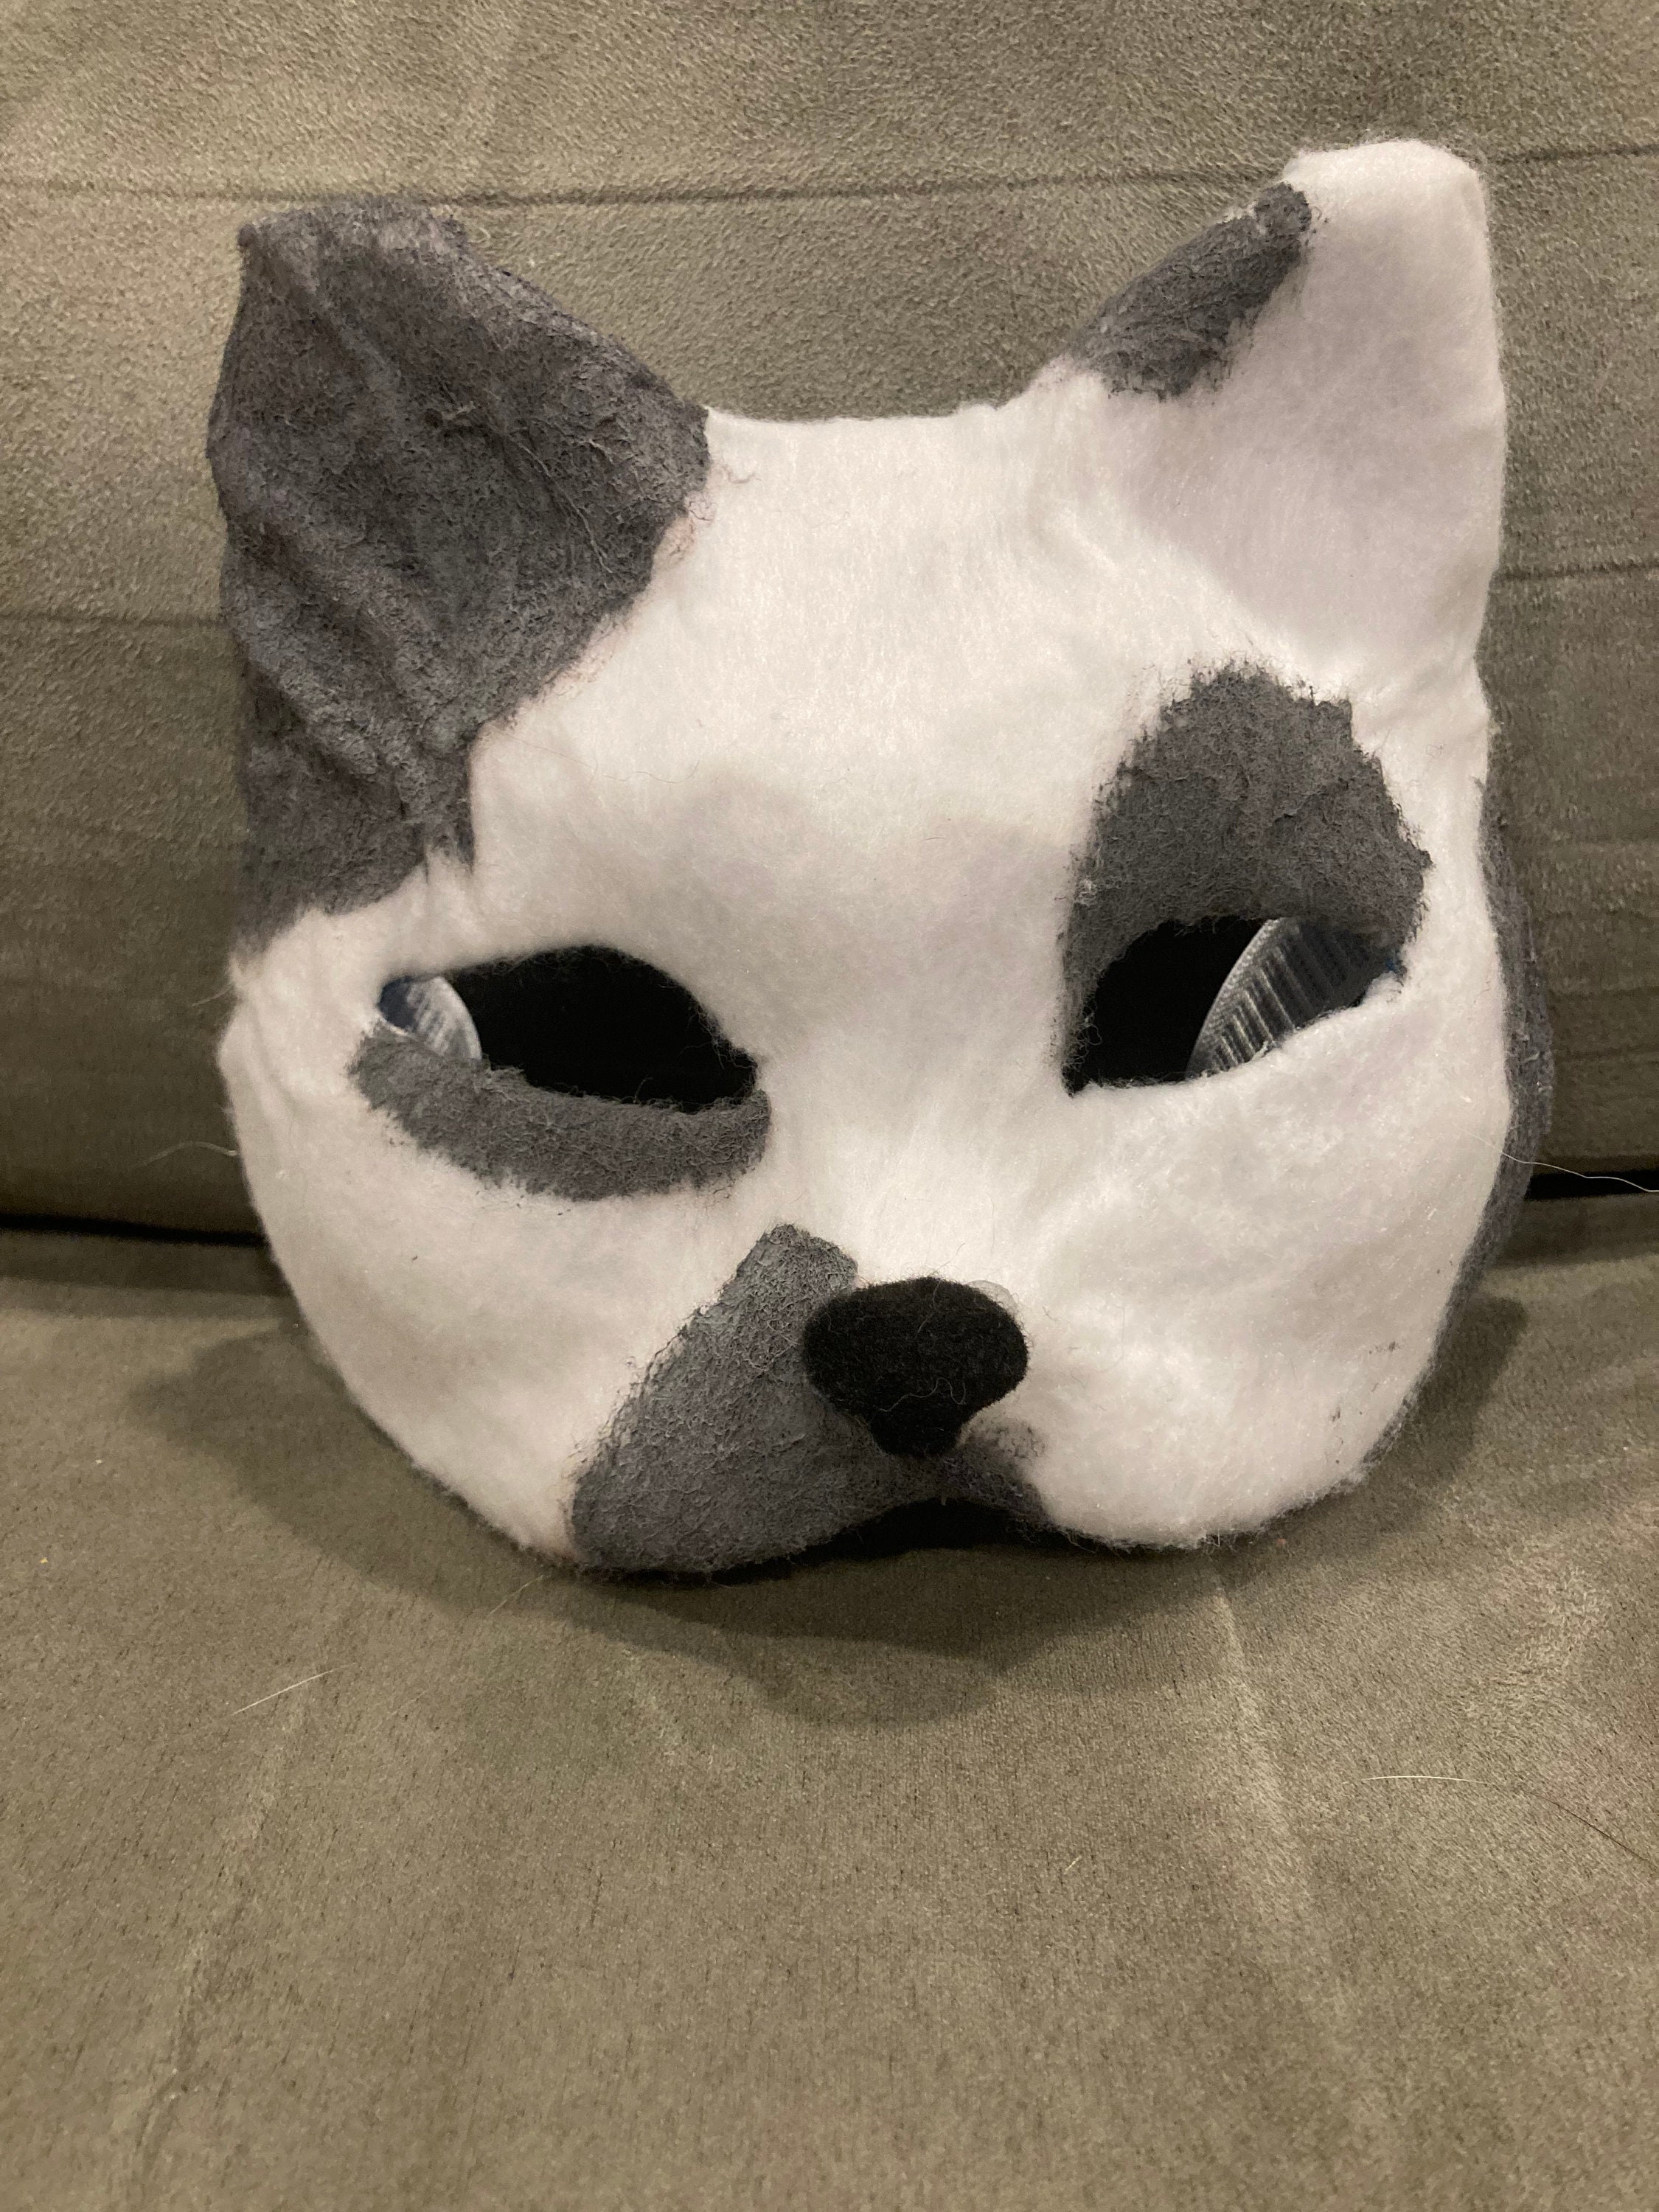 Therian White cat mask. Therian Gear. Cosplay Cat Mask . Fursuit Mask .  High Quality Therian Mask. OOAK Therian Mask. - Therian mask - shop -  magdalinen